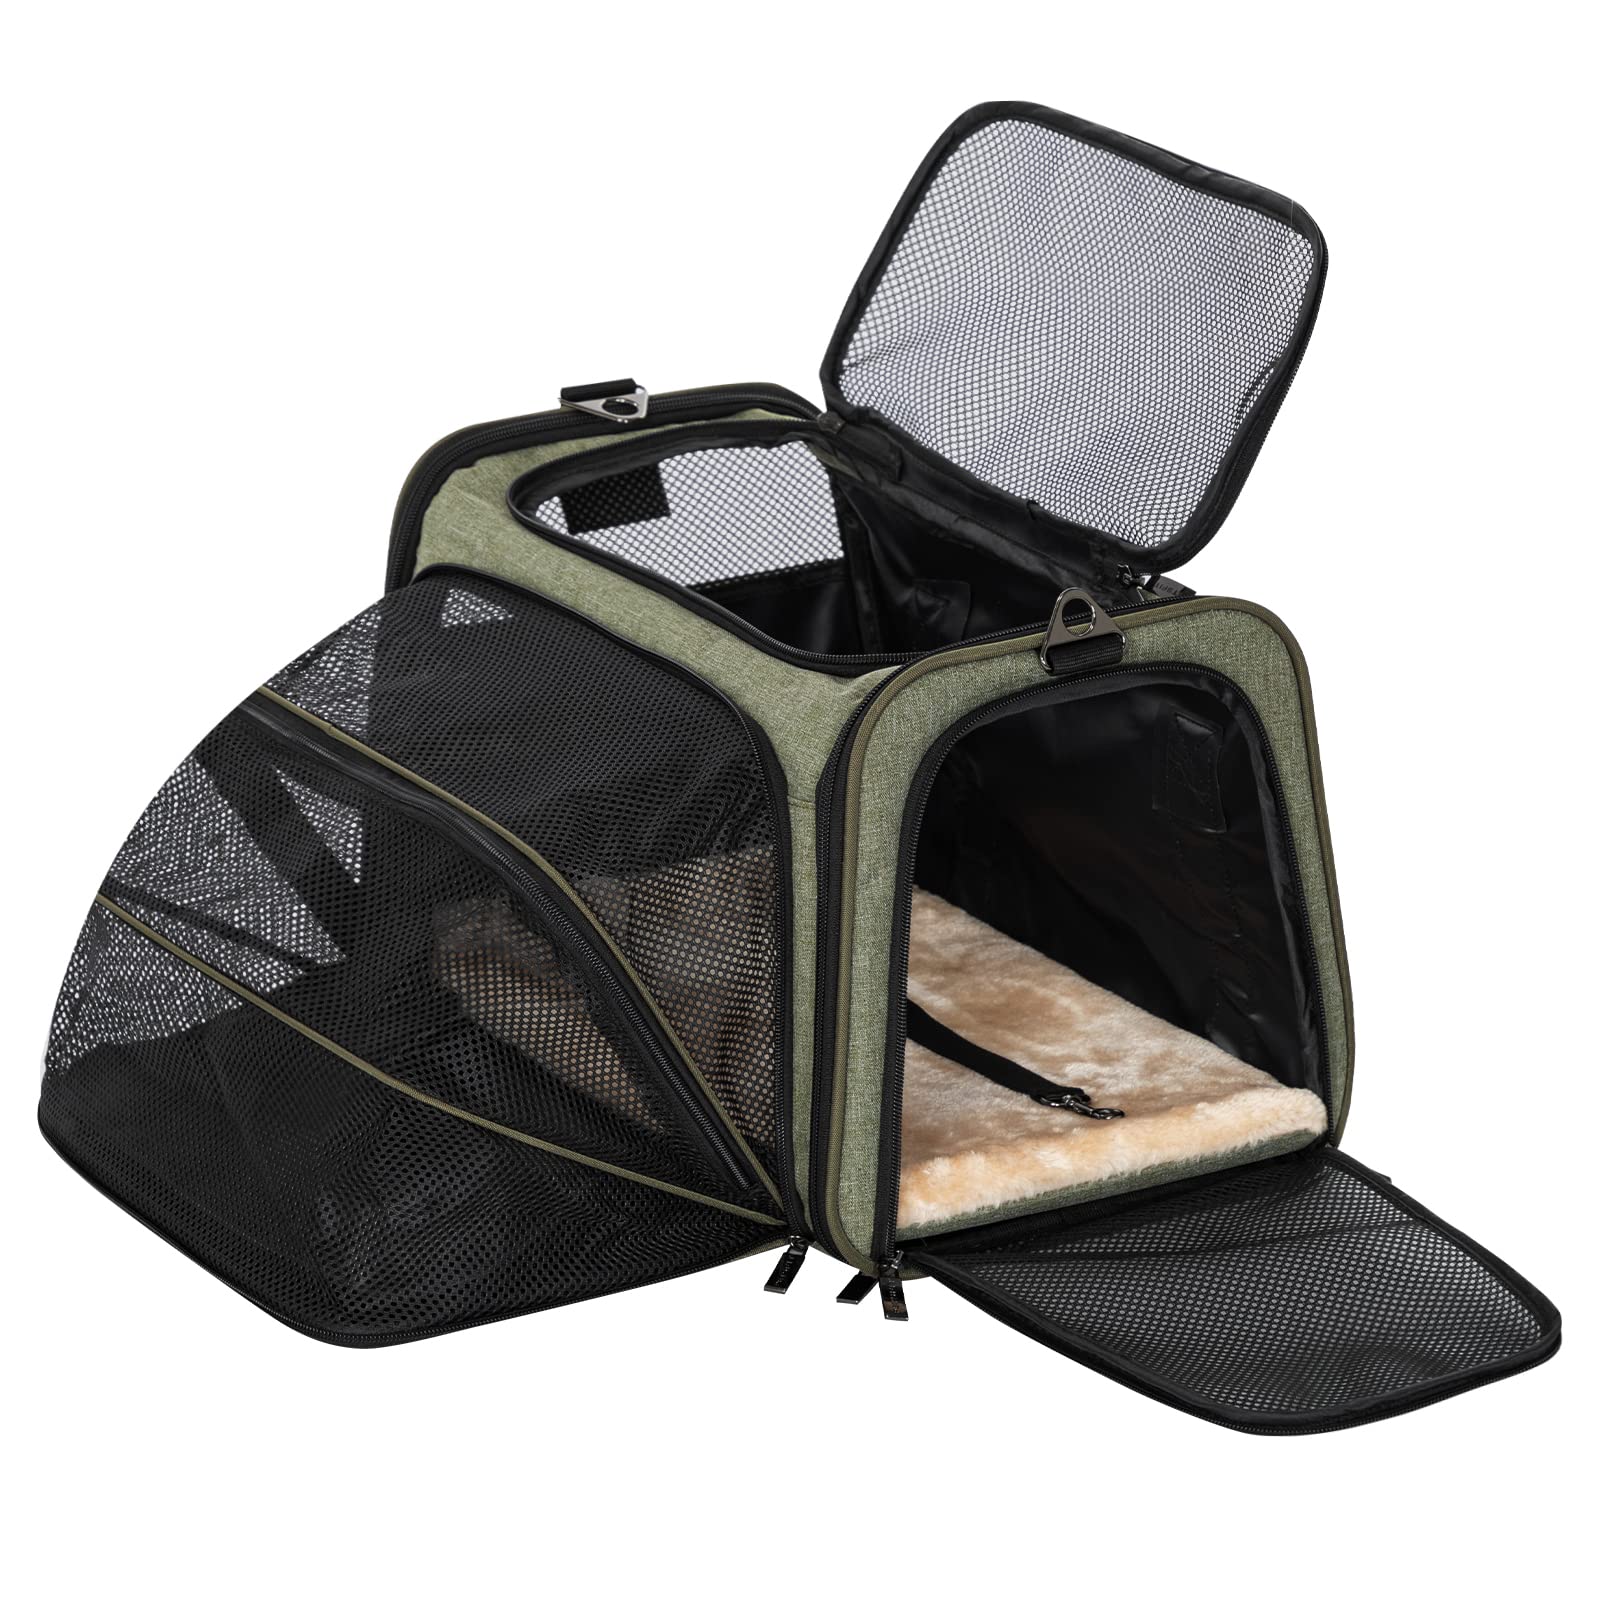 Petsfit Expandable Large cat carrier Small Dog carriers Airline